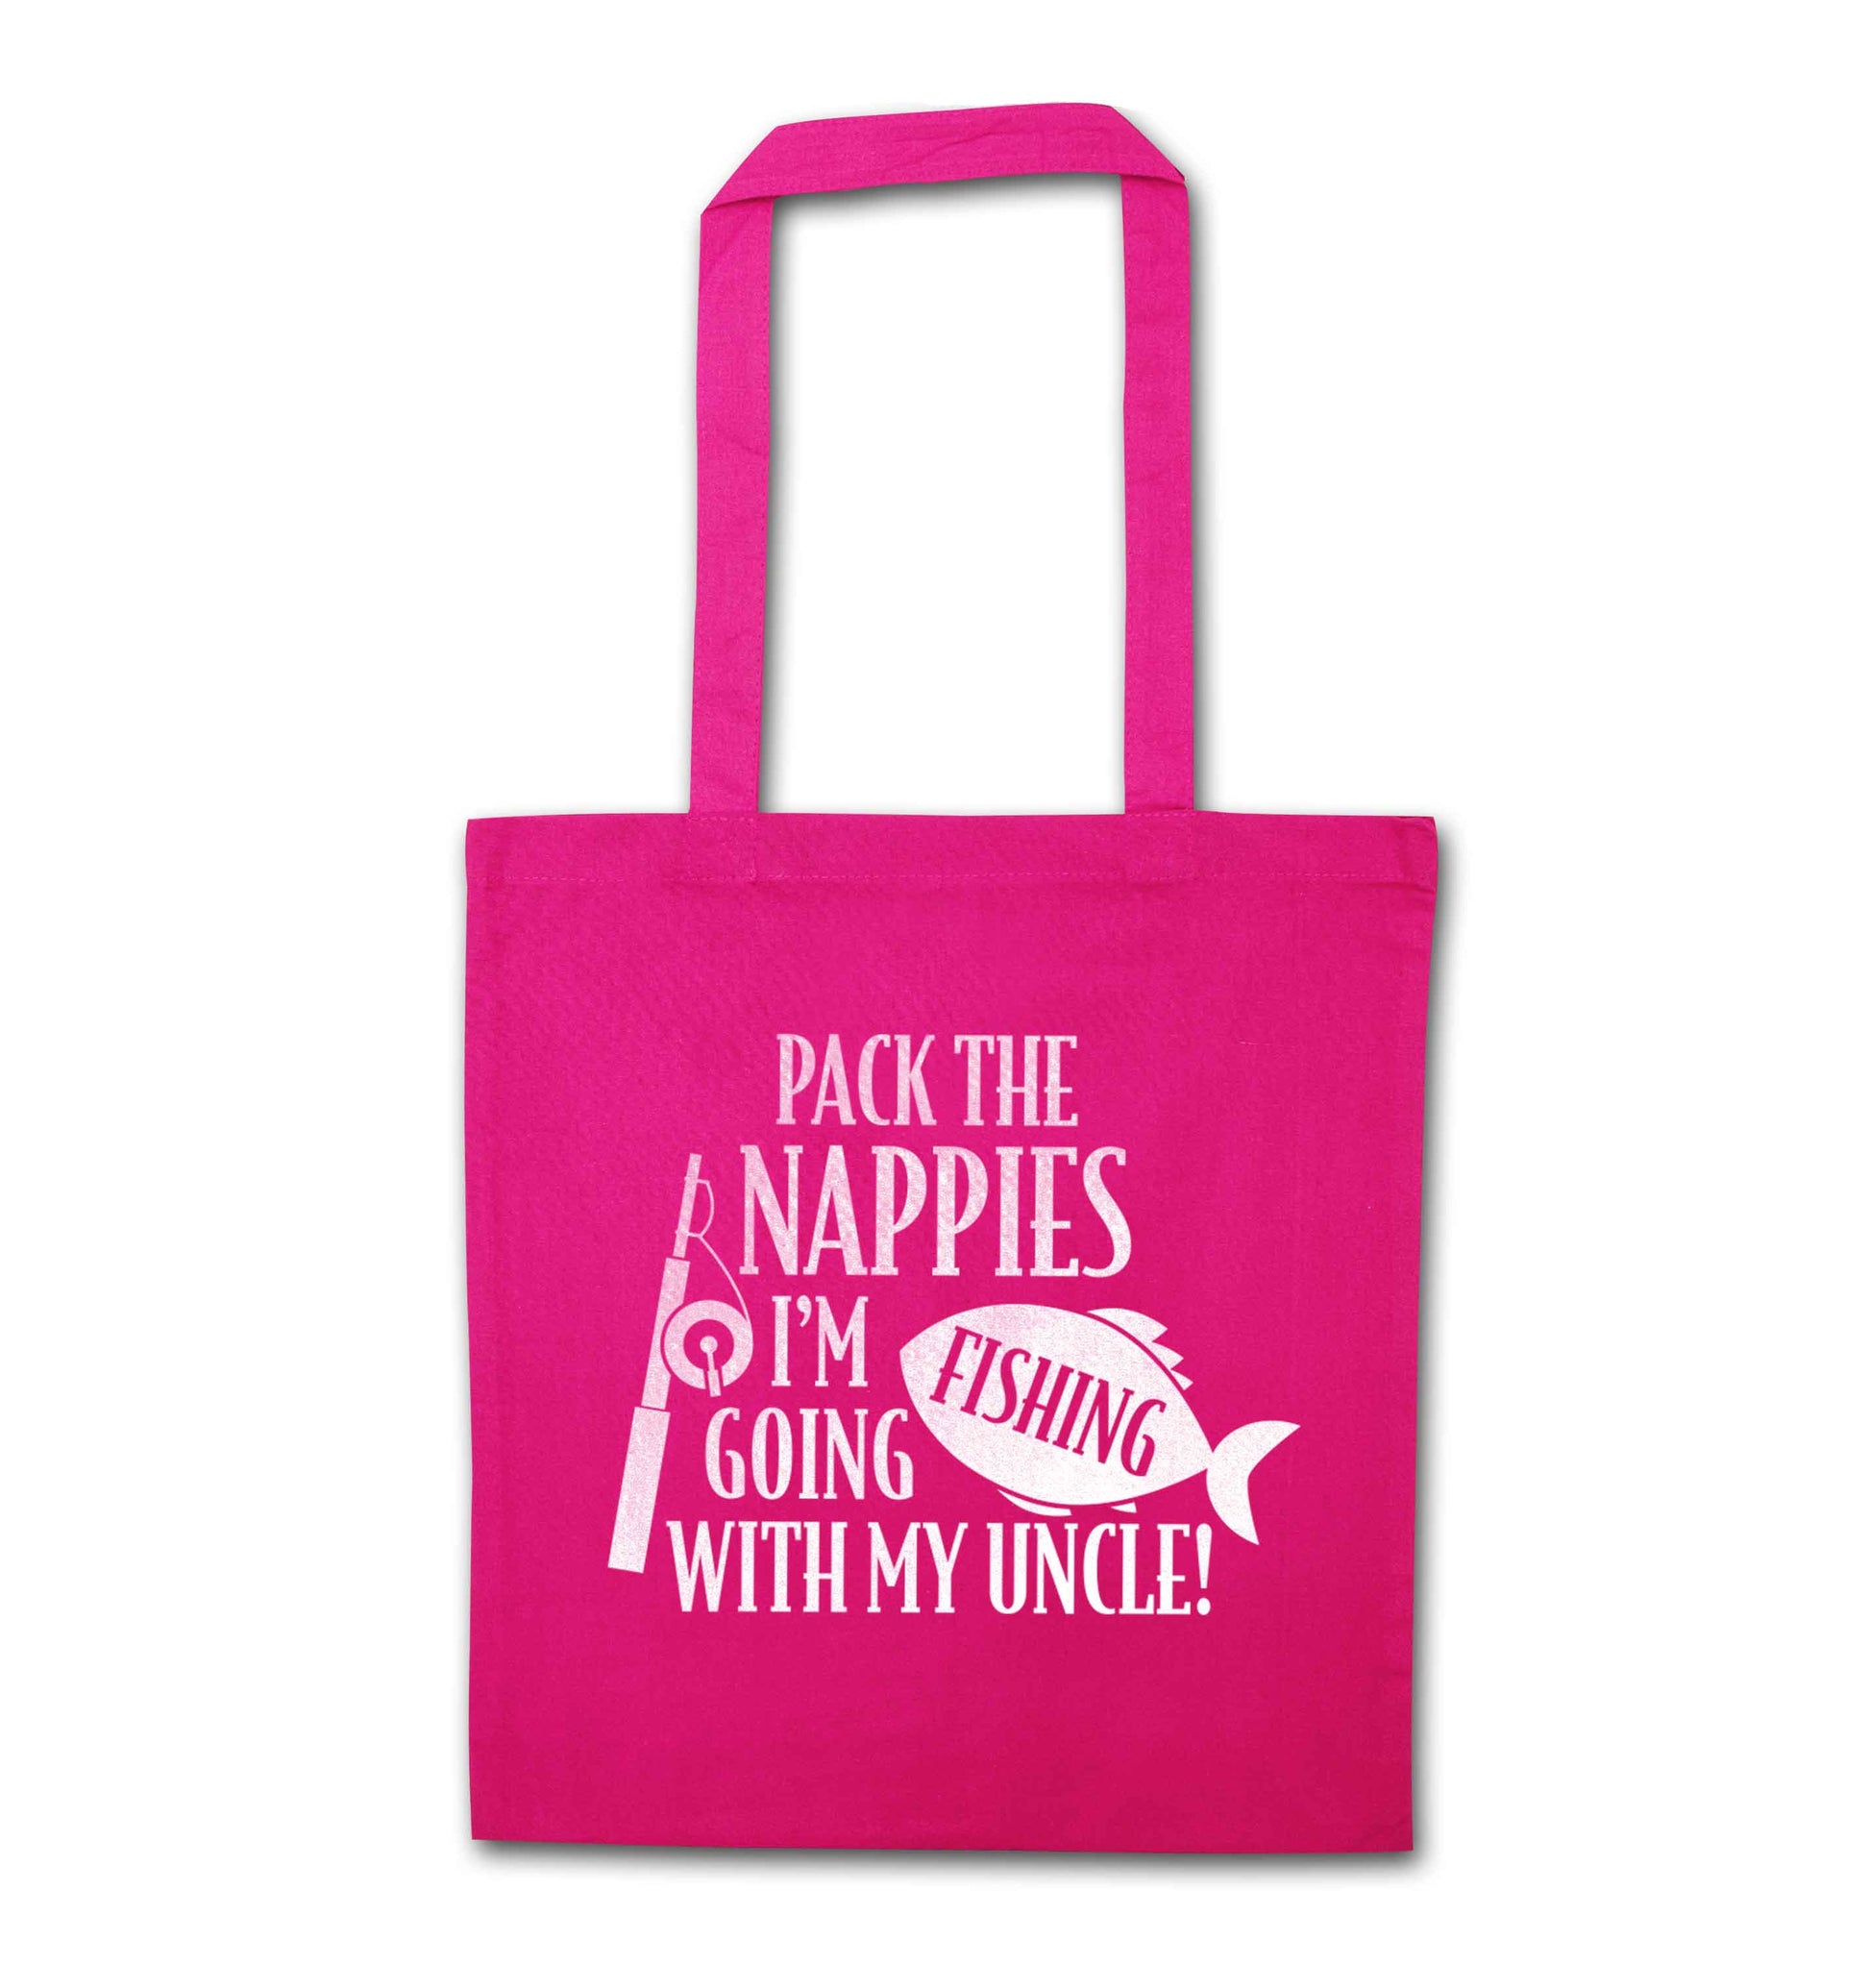 Pack the nappies I'm going fishing my Uncle pink tote bag